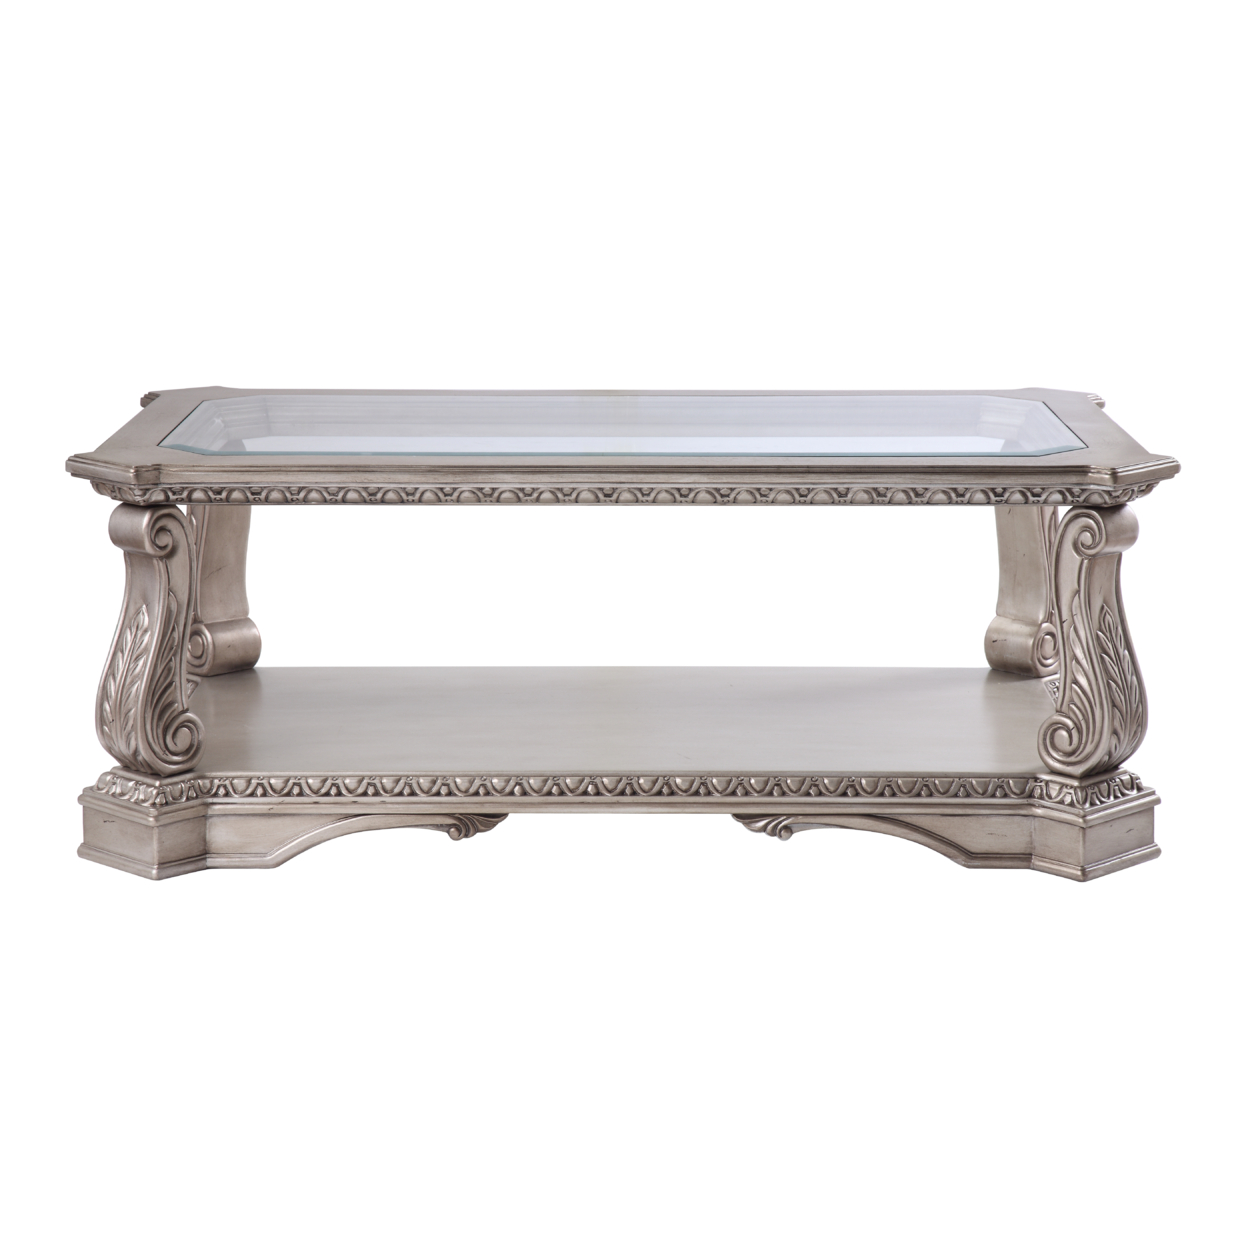 Wooden Coffee Table With Inserted Glass Top And Scrolled Legs, Silver And Clear- Saltoro Sherpi